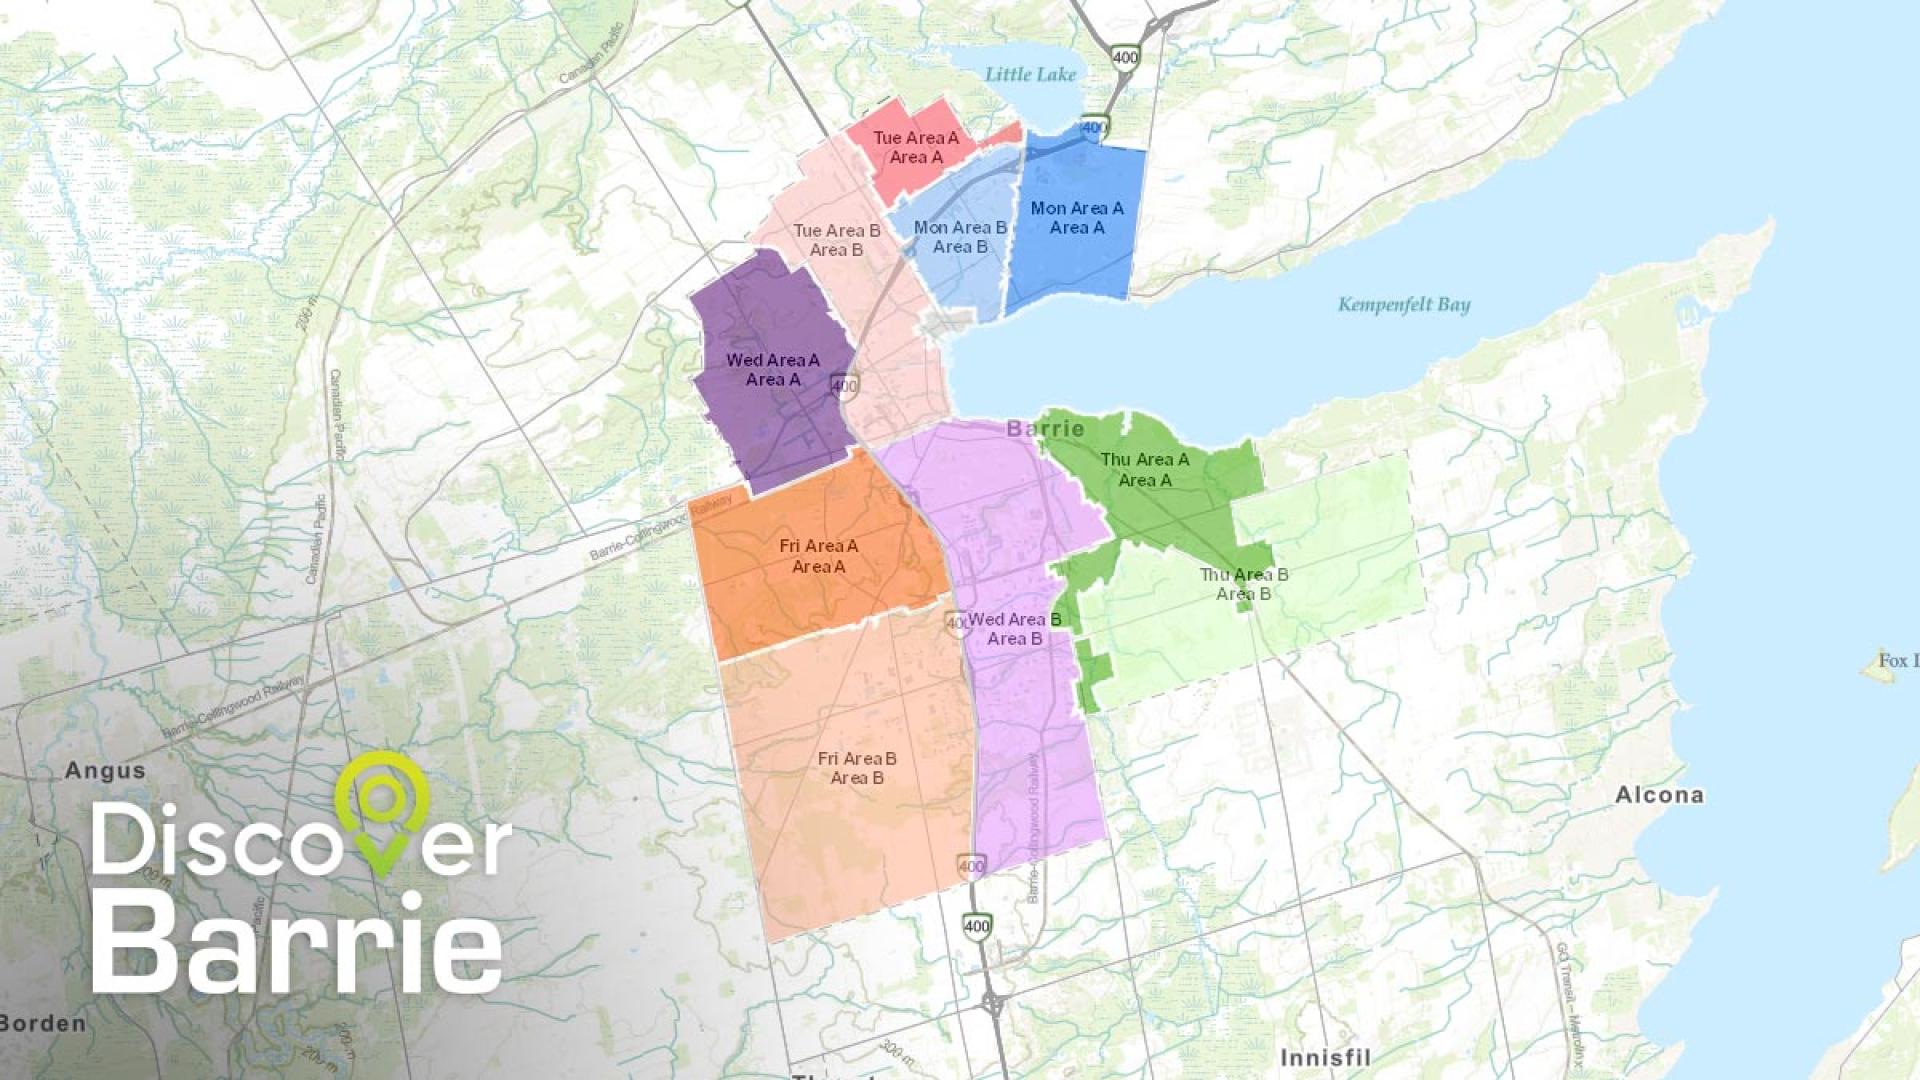 Discover Barrie logo over map of Barrie's curbside collection areas